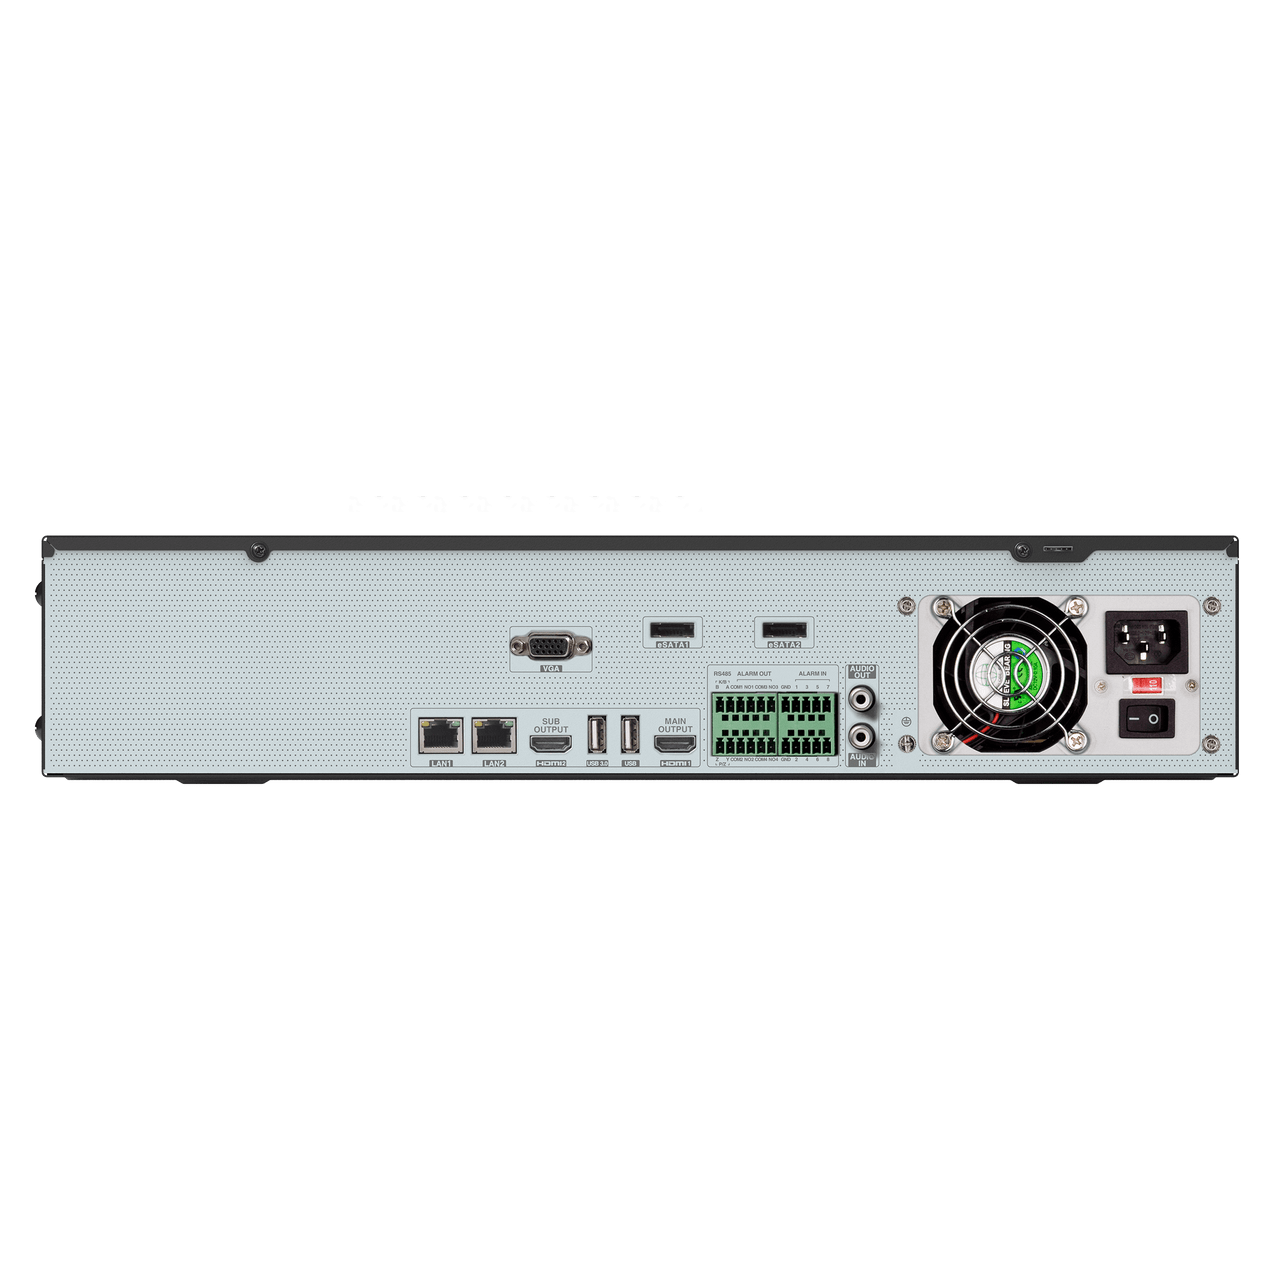 Speco Technologies N64NR64TB 64 Channel 4K H.265 NVR with Analytics- 64TB